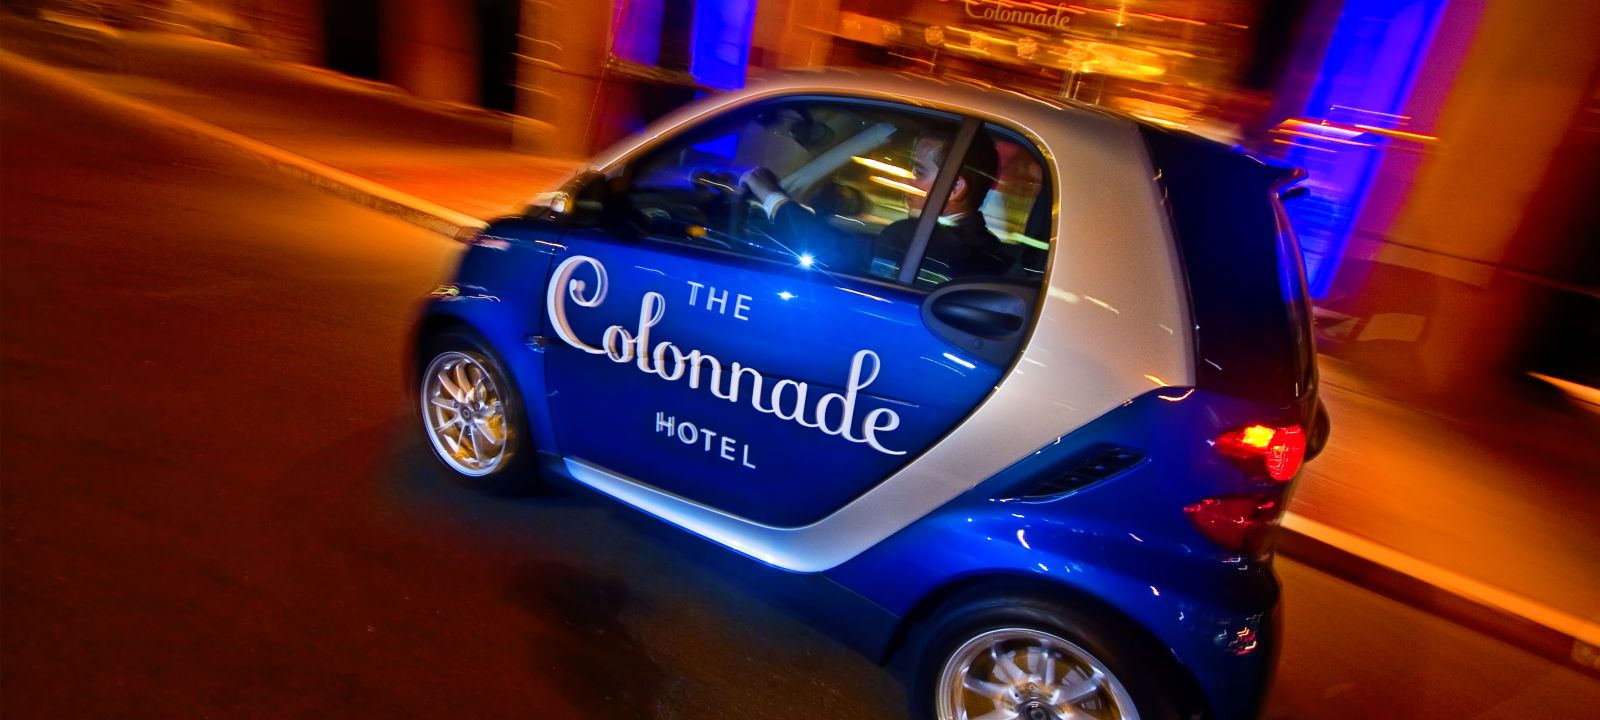 The Colonnade Hotel smart car